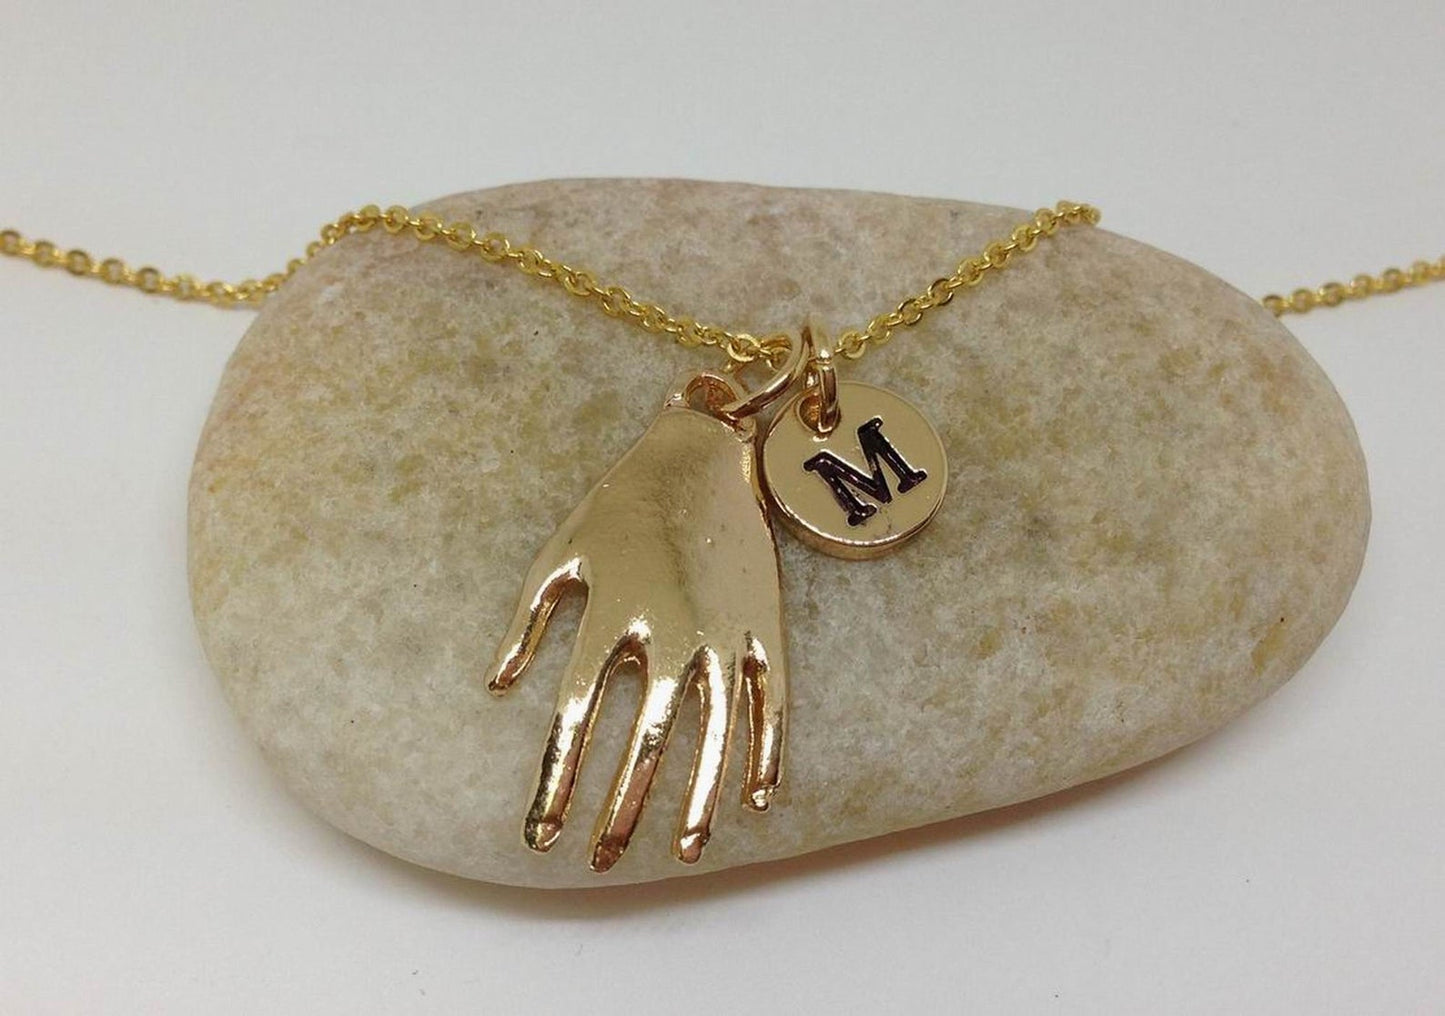 Gold Hand Charm Necklace, Picasso Art Necklace